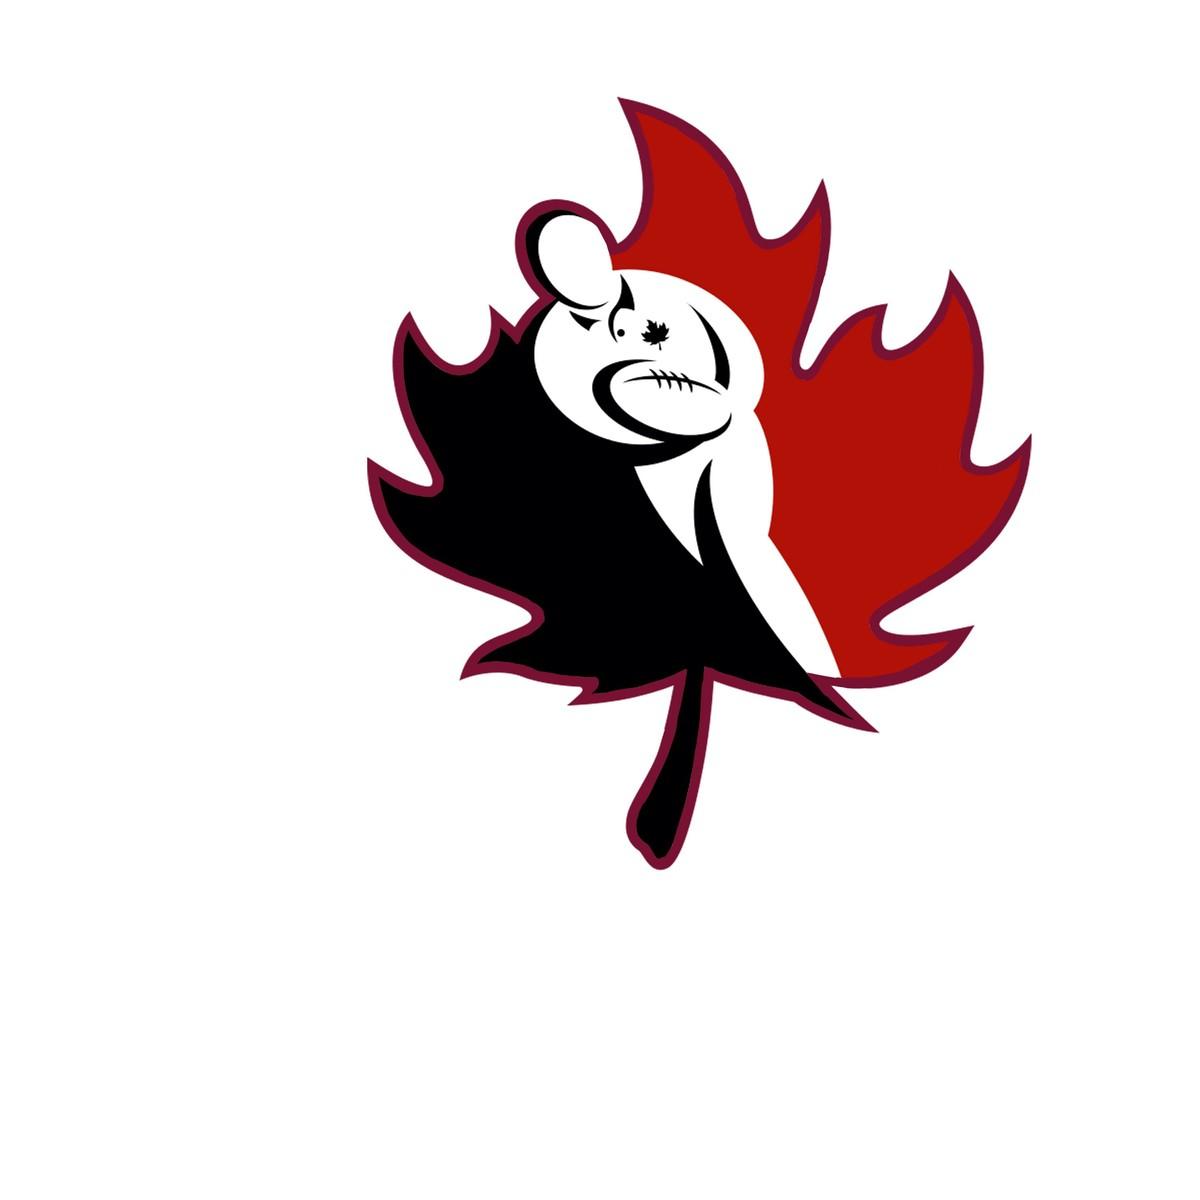 Rugby team emblem, mapple leaf red and black with a rugby player inside